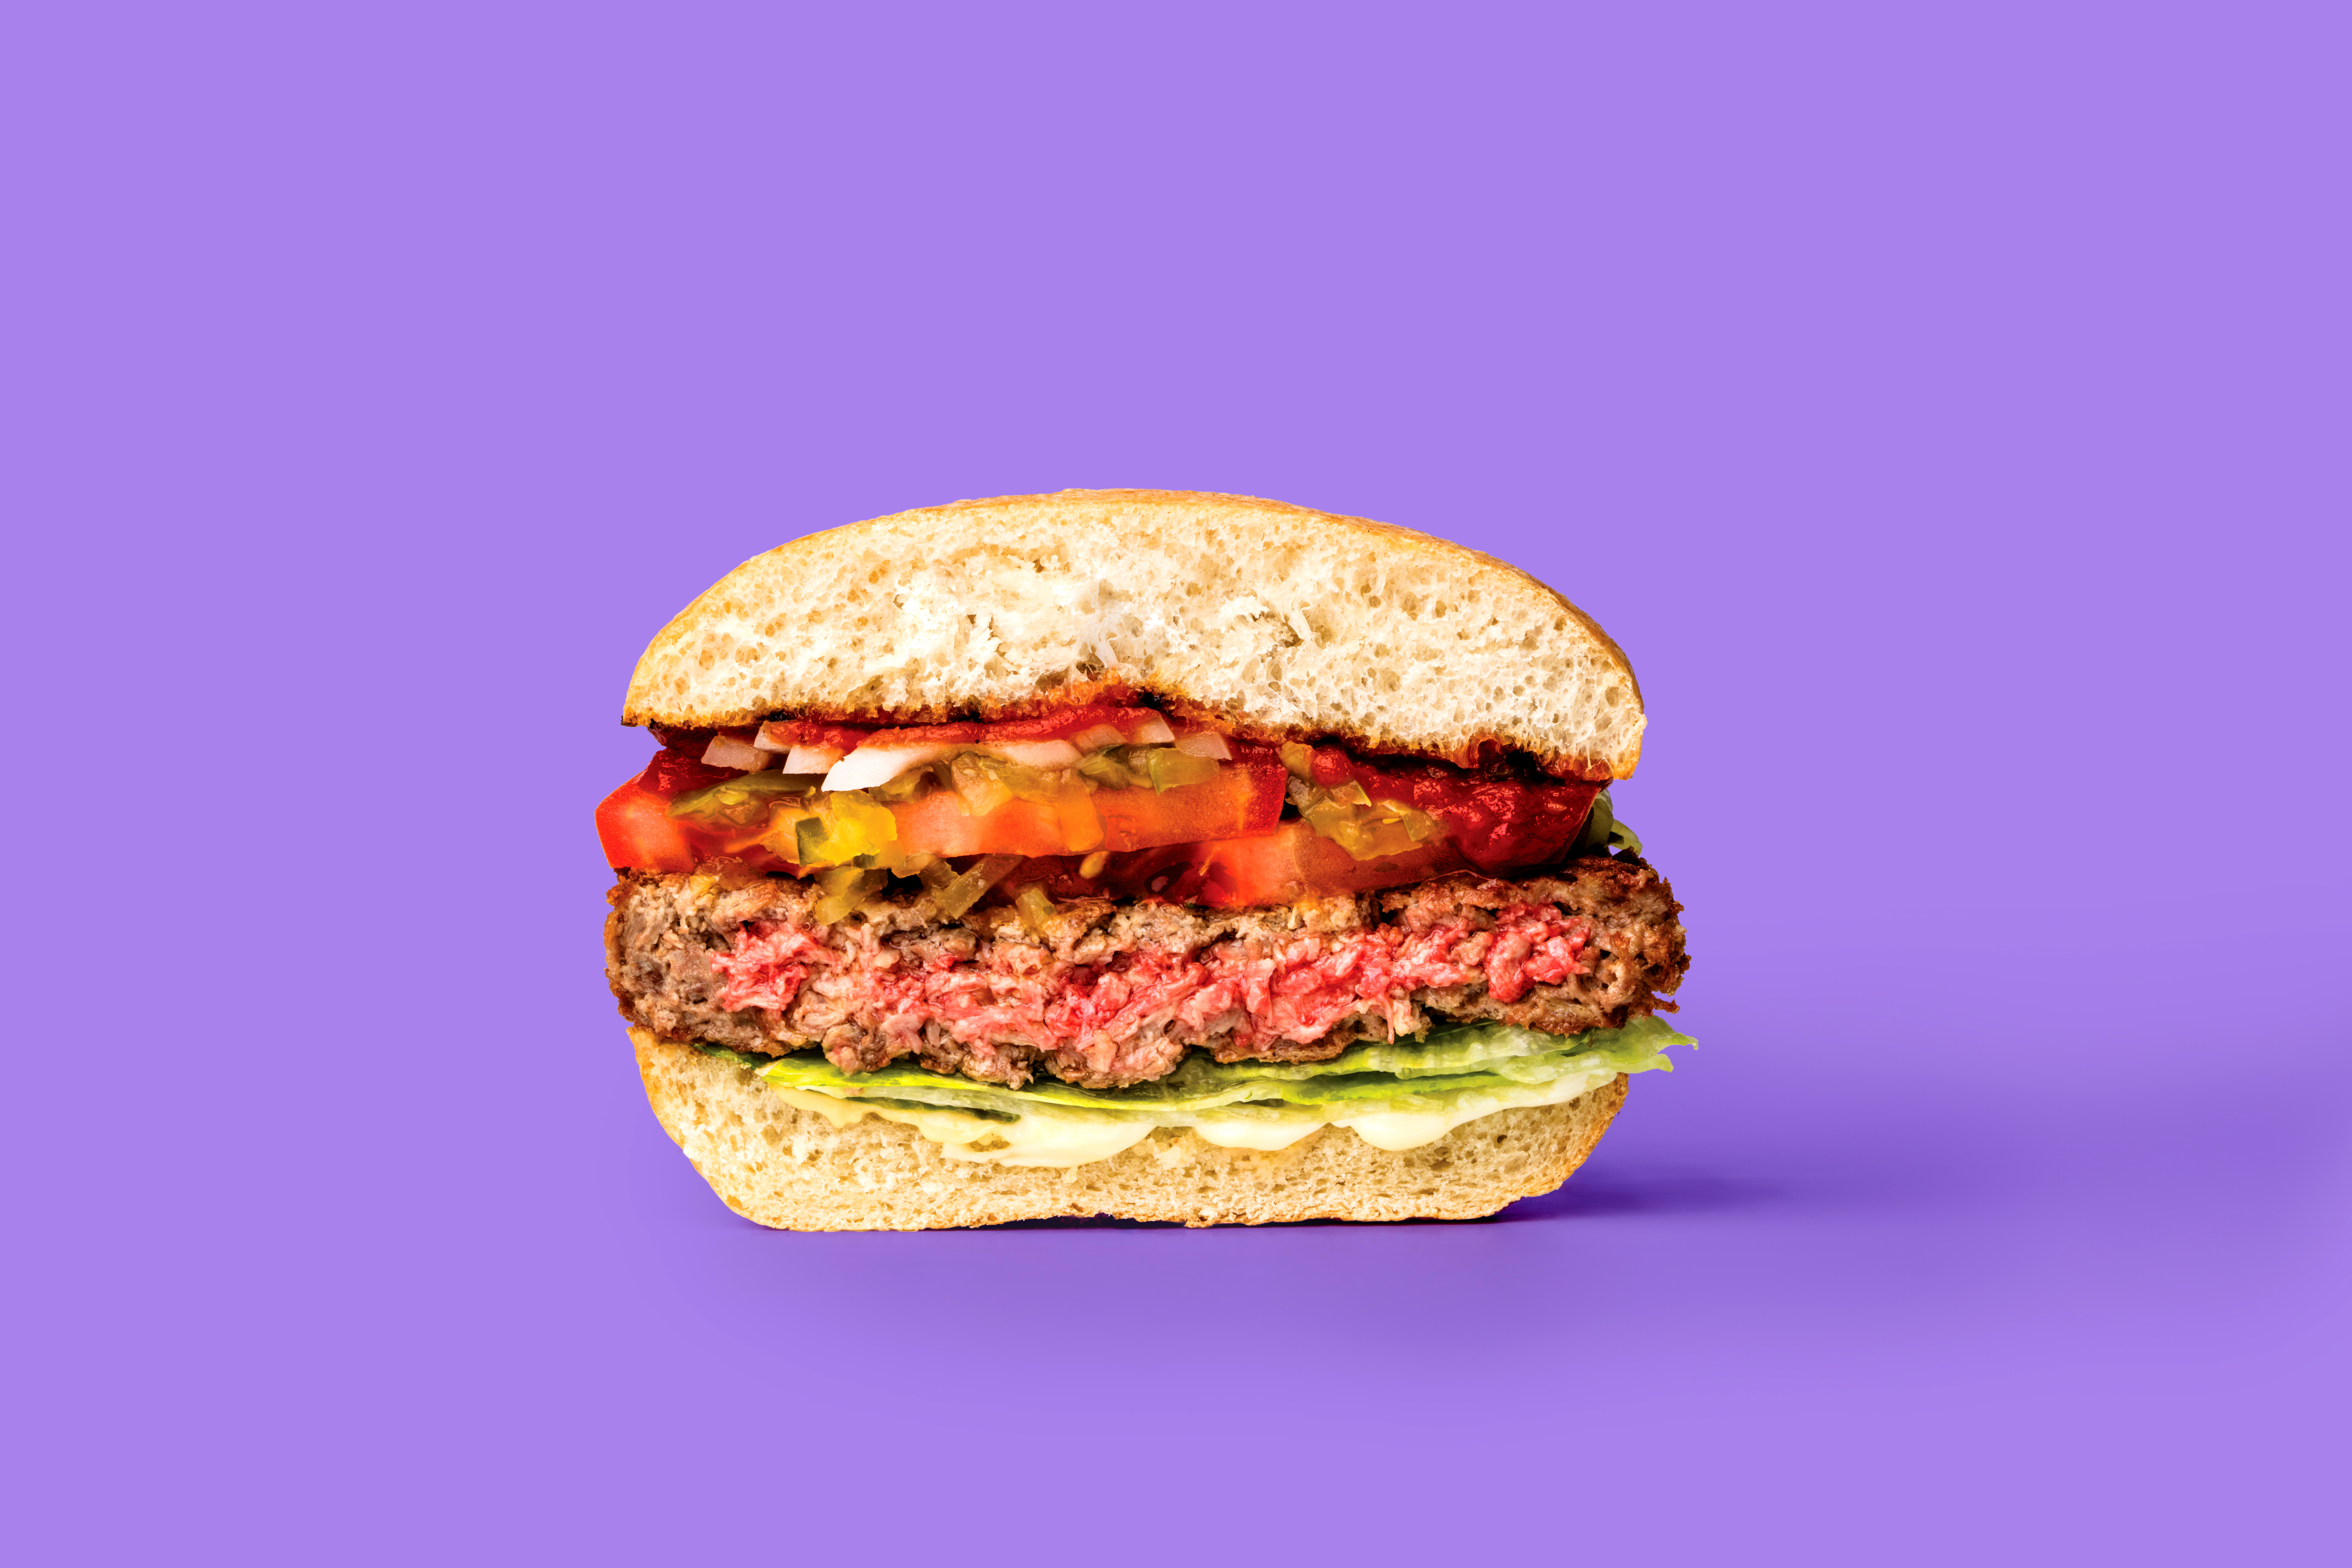 Impossible Foods raised $300 million dollars in Series E funding and could follow Beyond Meat in going public